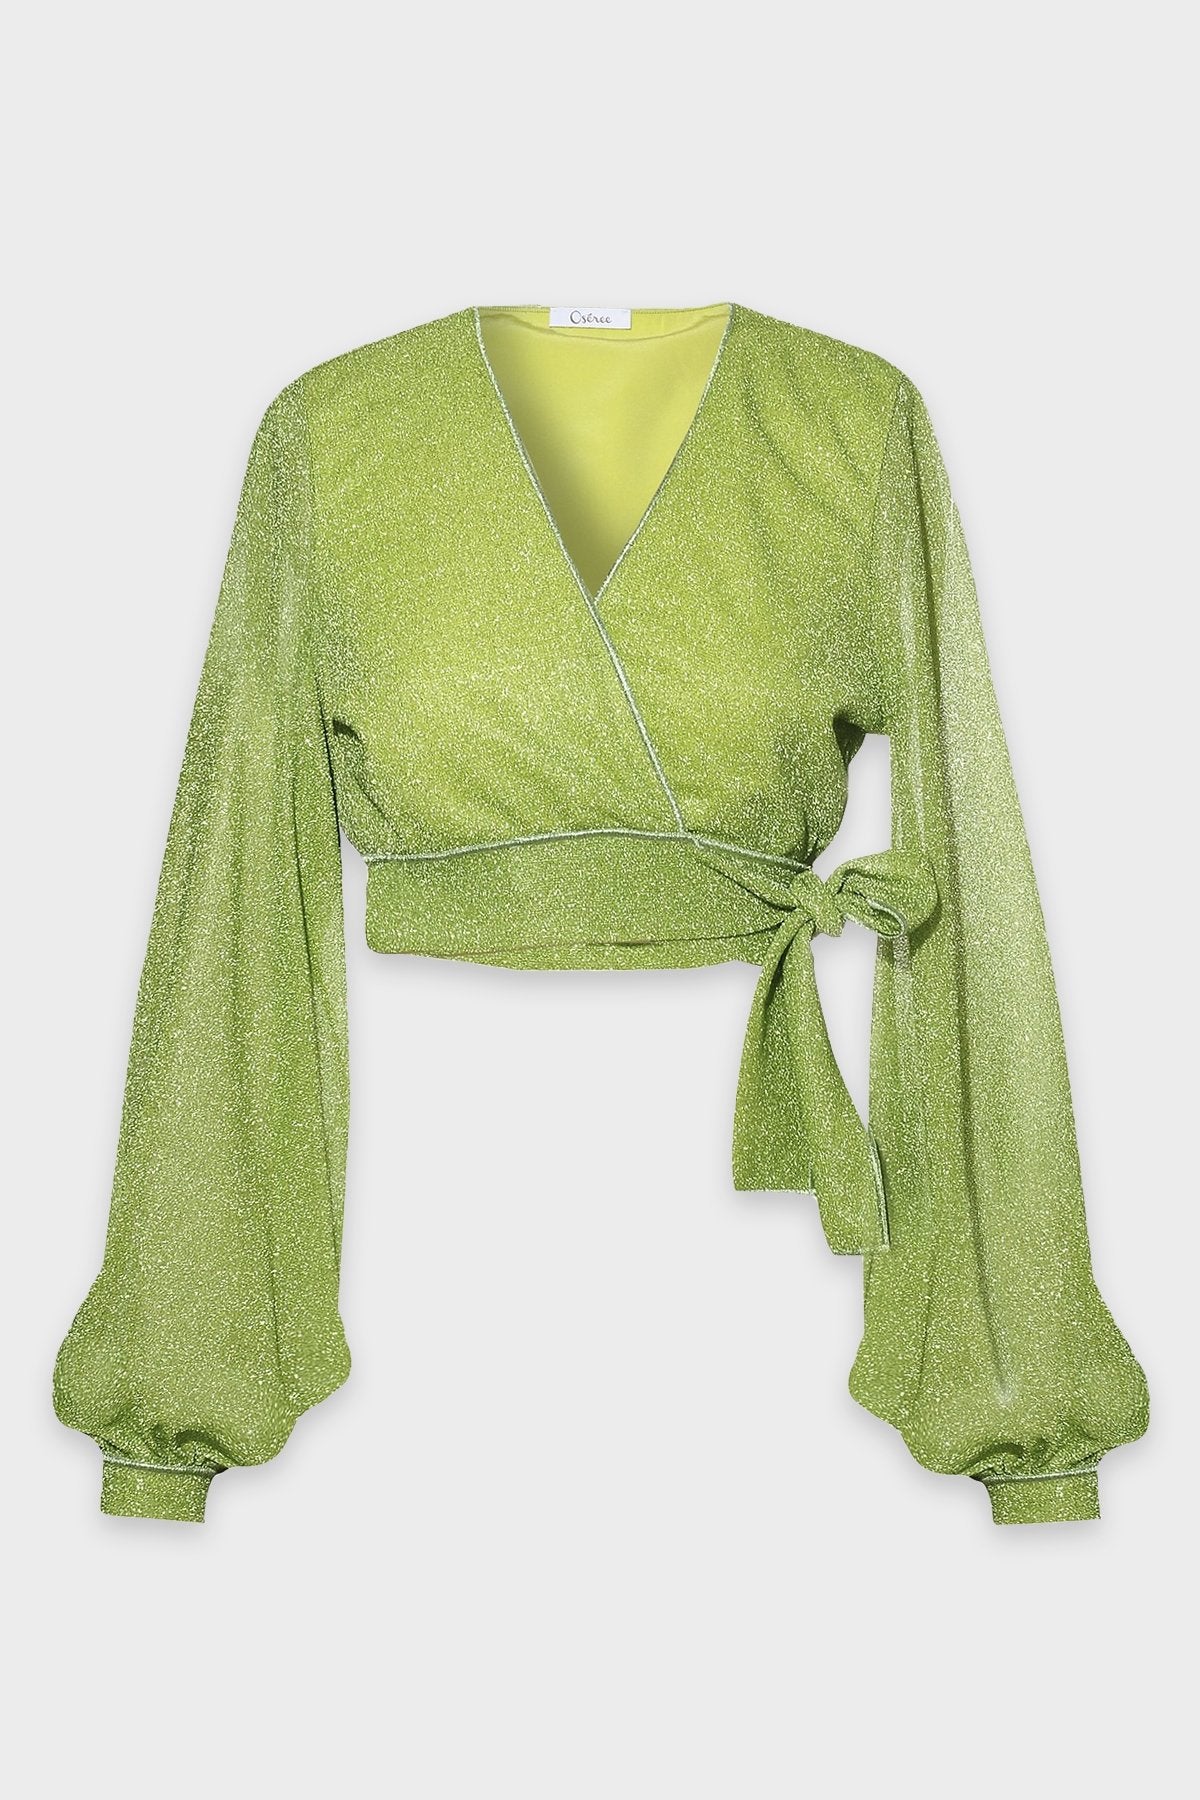 Lumière Tied Shirt in Lime - shop-olivia.com